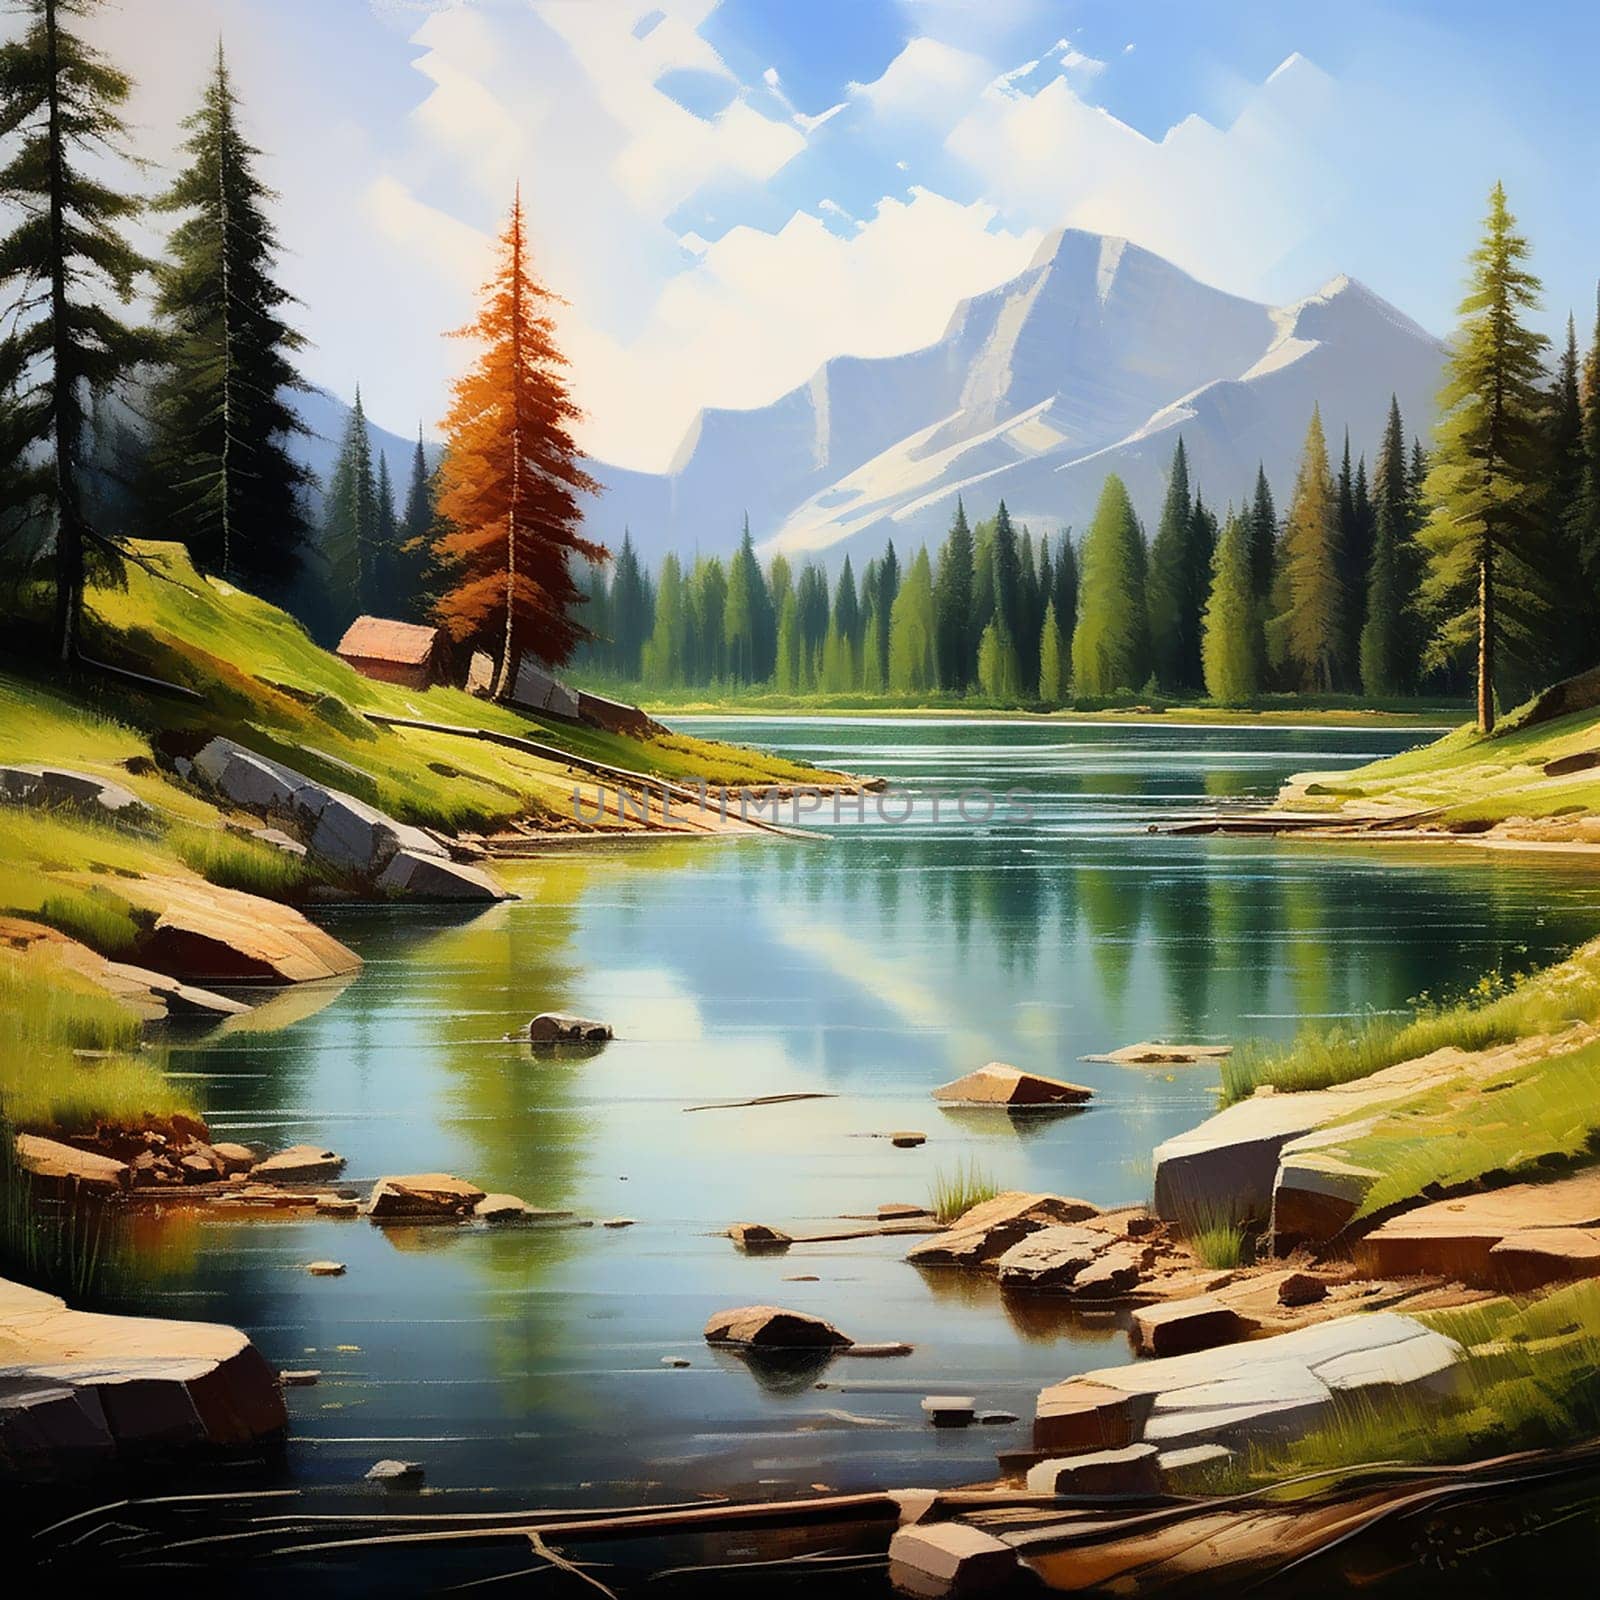 Mountain Oasis: Tranquility in the Scenic Beauty of Lake, Stream, and Pine Trees by Petrichor